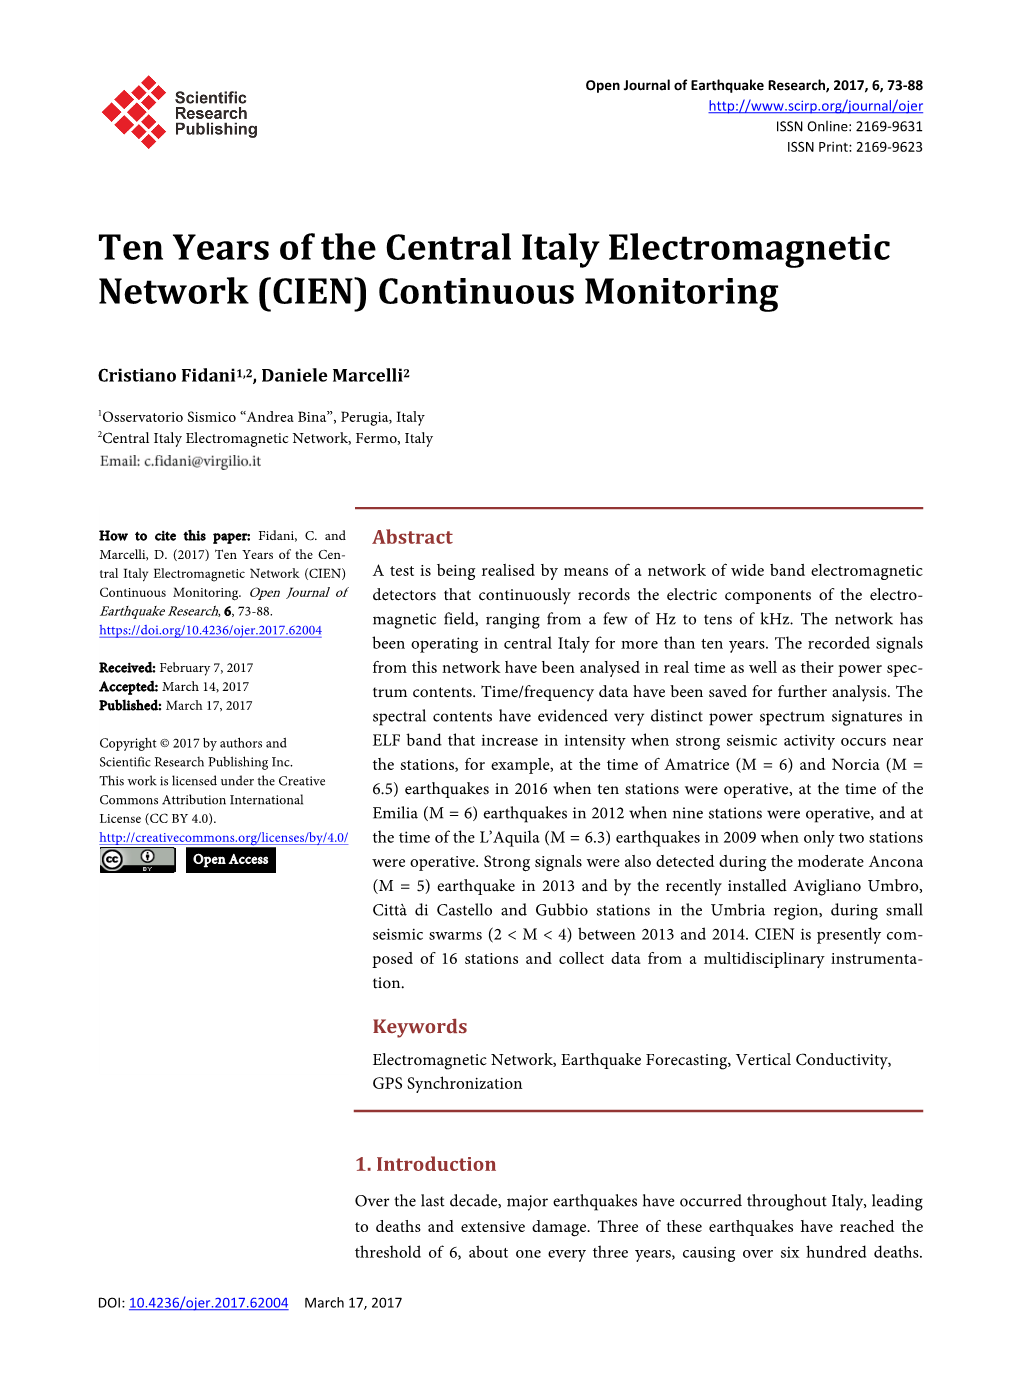 Ten Years of the Central Italy Electromagnetic Network (CIEN) Continuous Monitoring